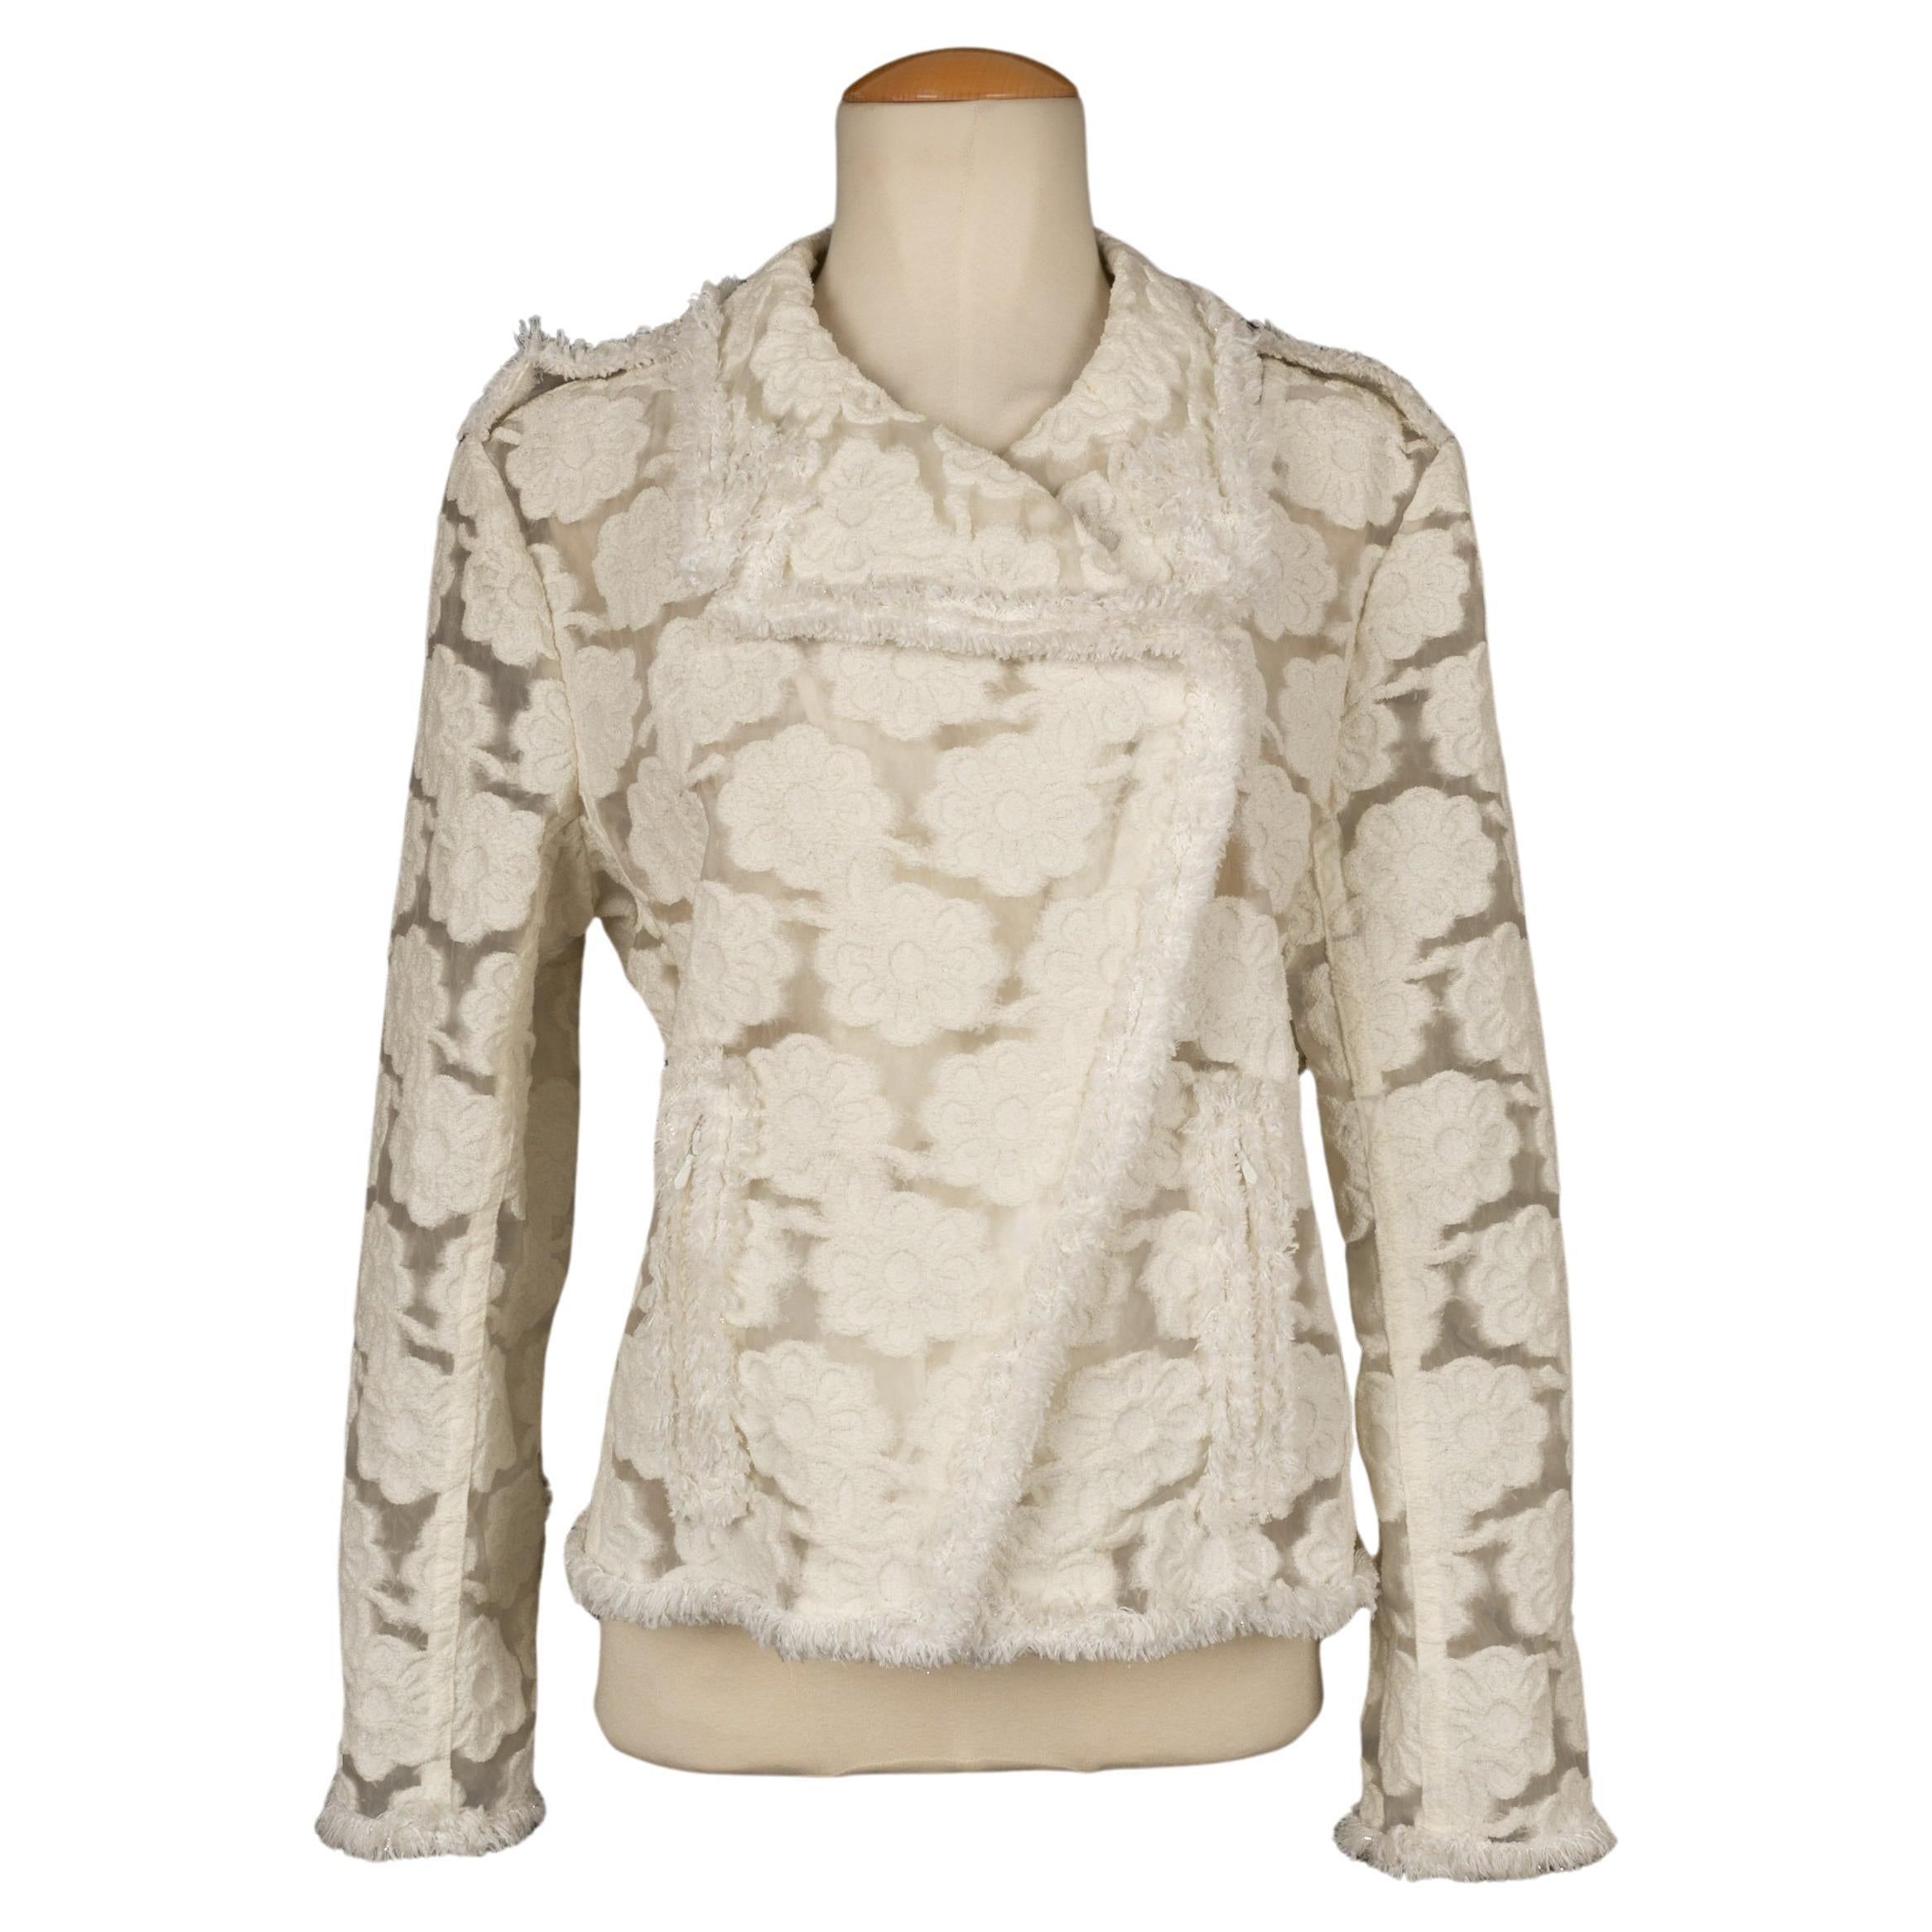 Chanel Blended Cotton Openwork Jacket Representing White Flowers, 2009